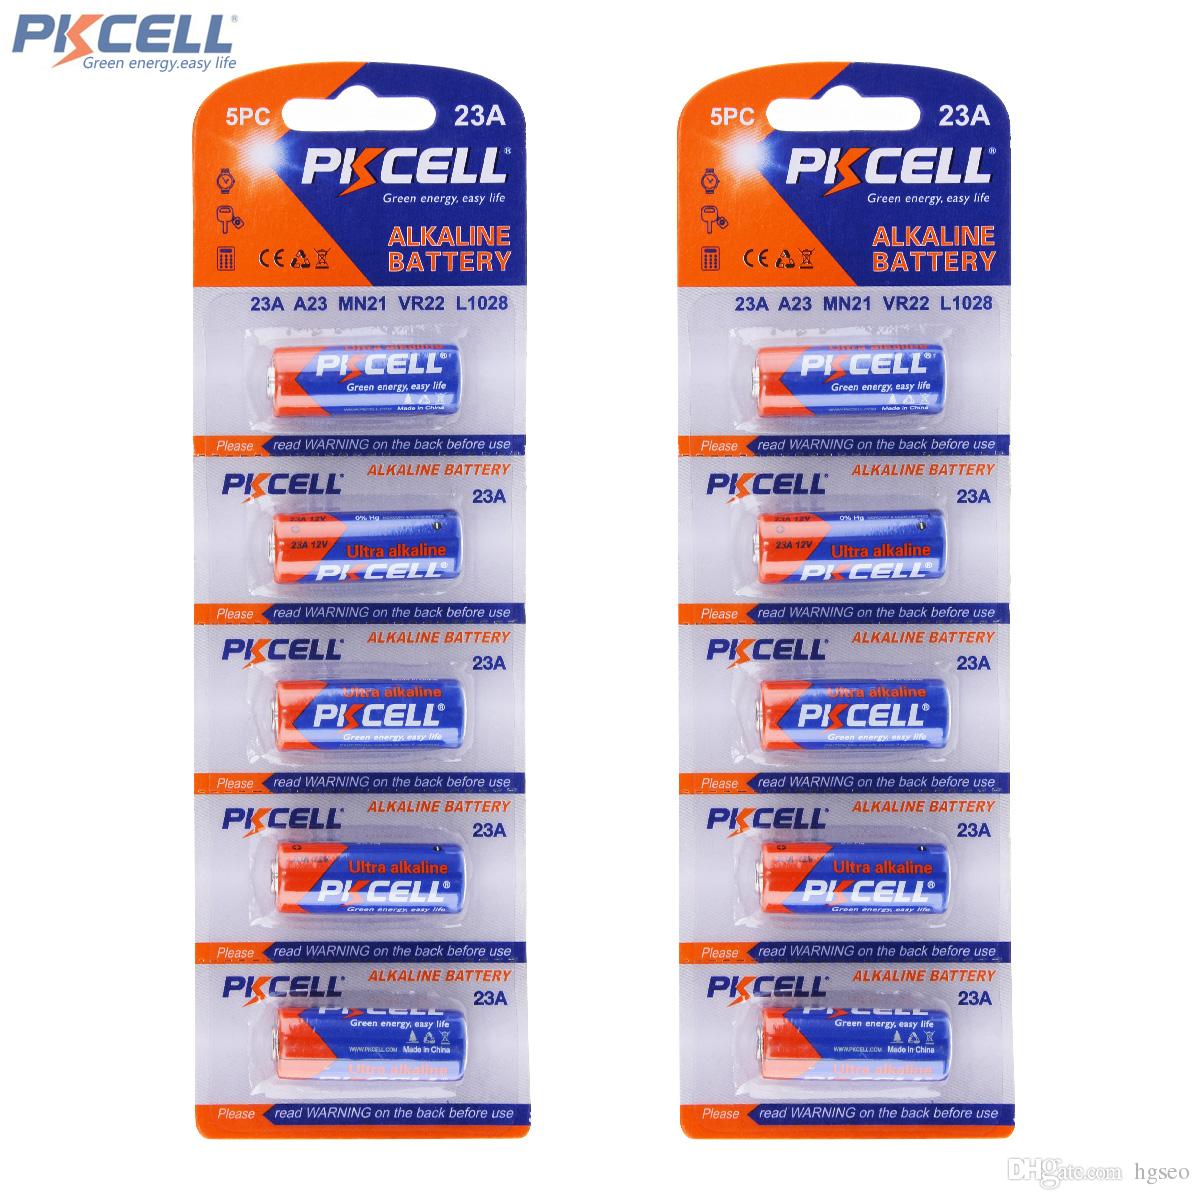 10Pcs PKCELL Alkaline Dry Batteries Primary 23A A23 MN21 12V For Garage Door Opener / Remote Control / Doorbell ACC_10I